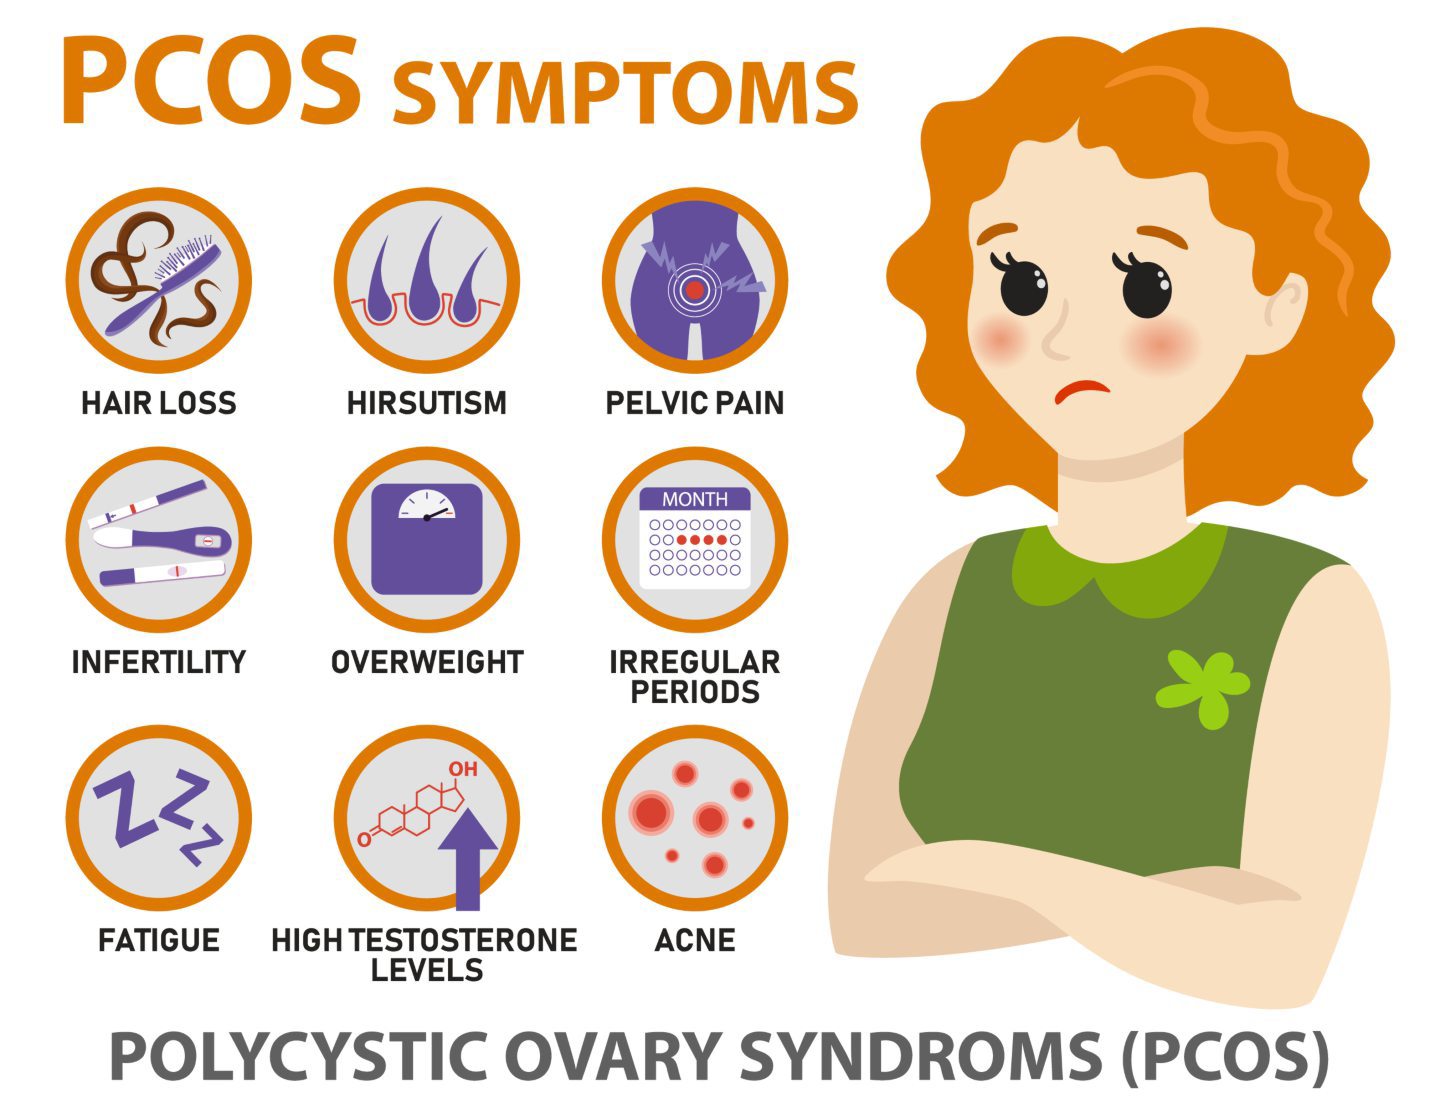 A list of pcos symptoms including: hair loss, hirsutism, pelvic pain, infertility, overweight, irregular periods, fatigue, high testosterone levels and acne.